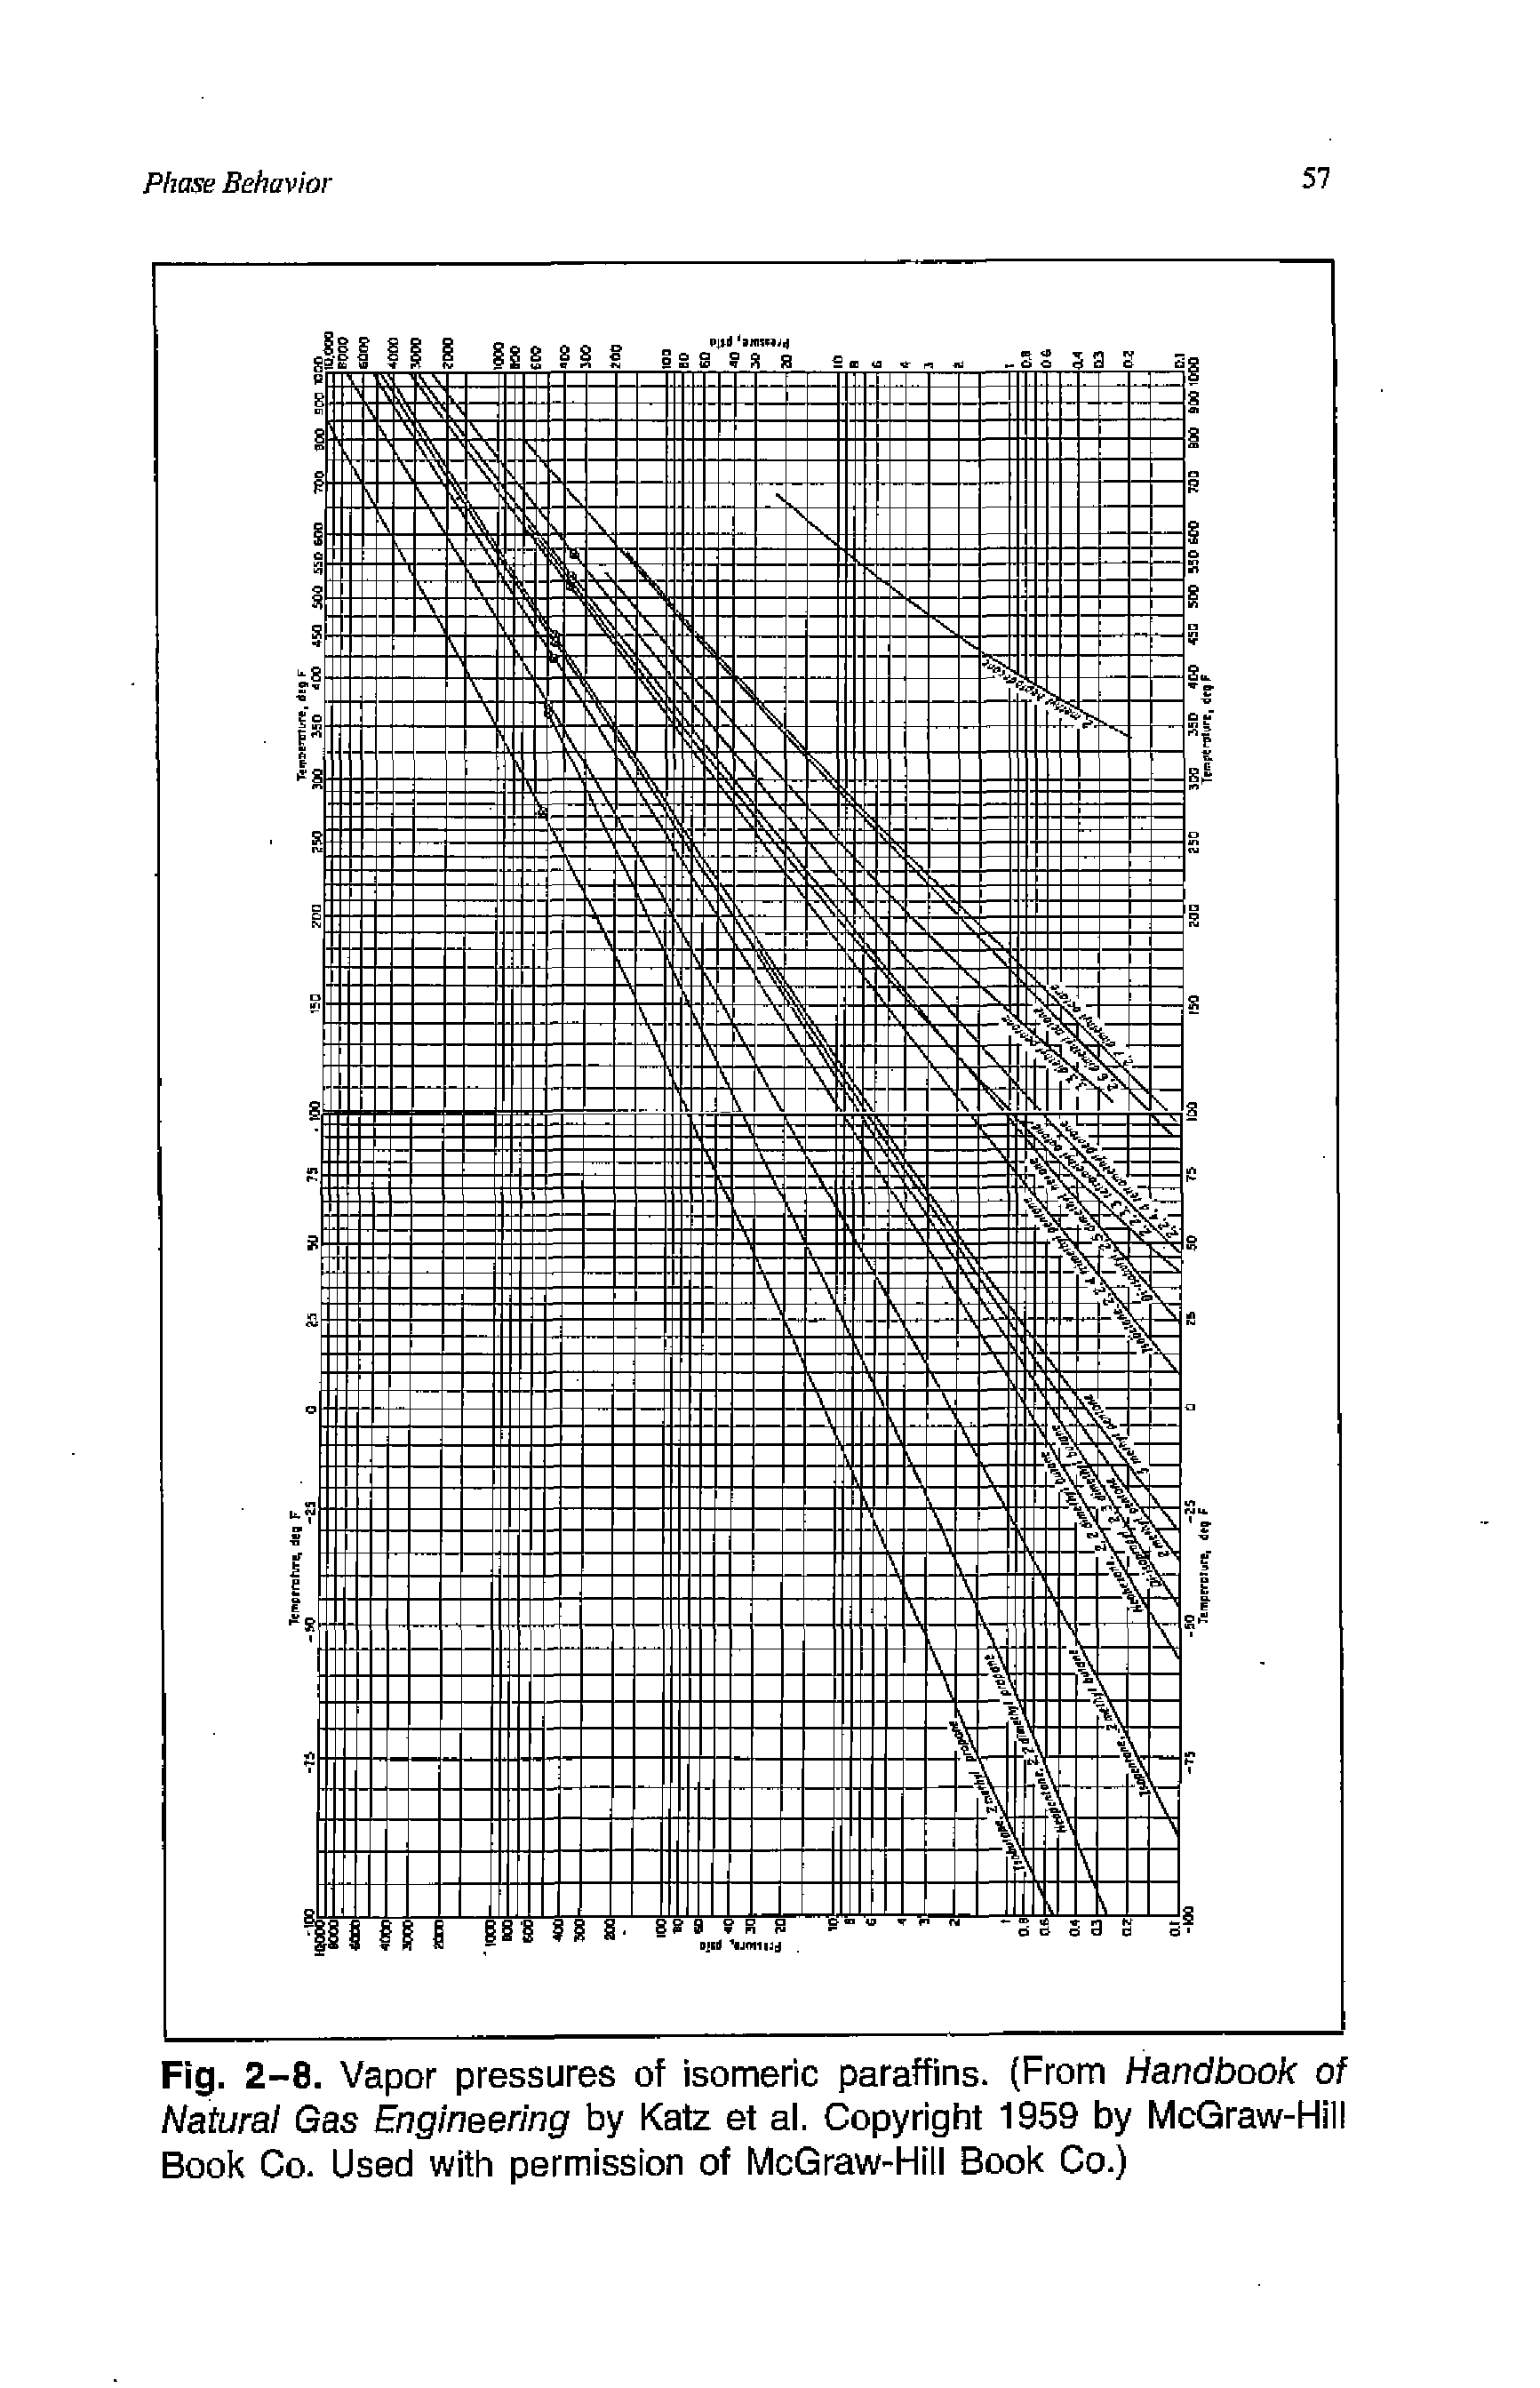 Fig. 2-8. Vapor pressures of isomeric paraffins. (From Handbook of Natural Gas Engineering by Katz et al. Copyright 1959 by McGraw-Hill Book Co. Used with permission of McGraw-Hill Book Co.)...